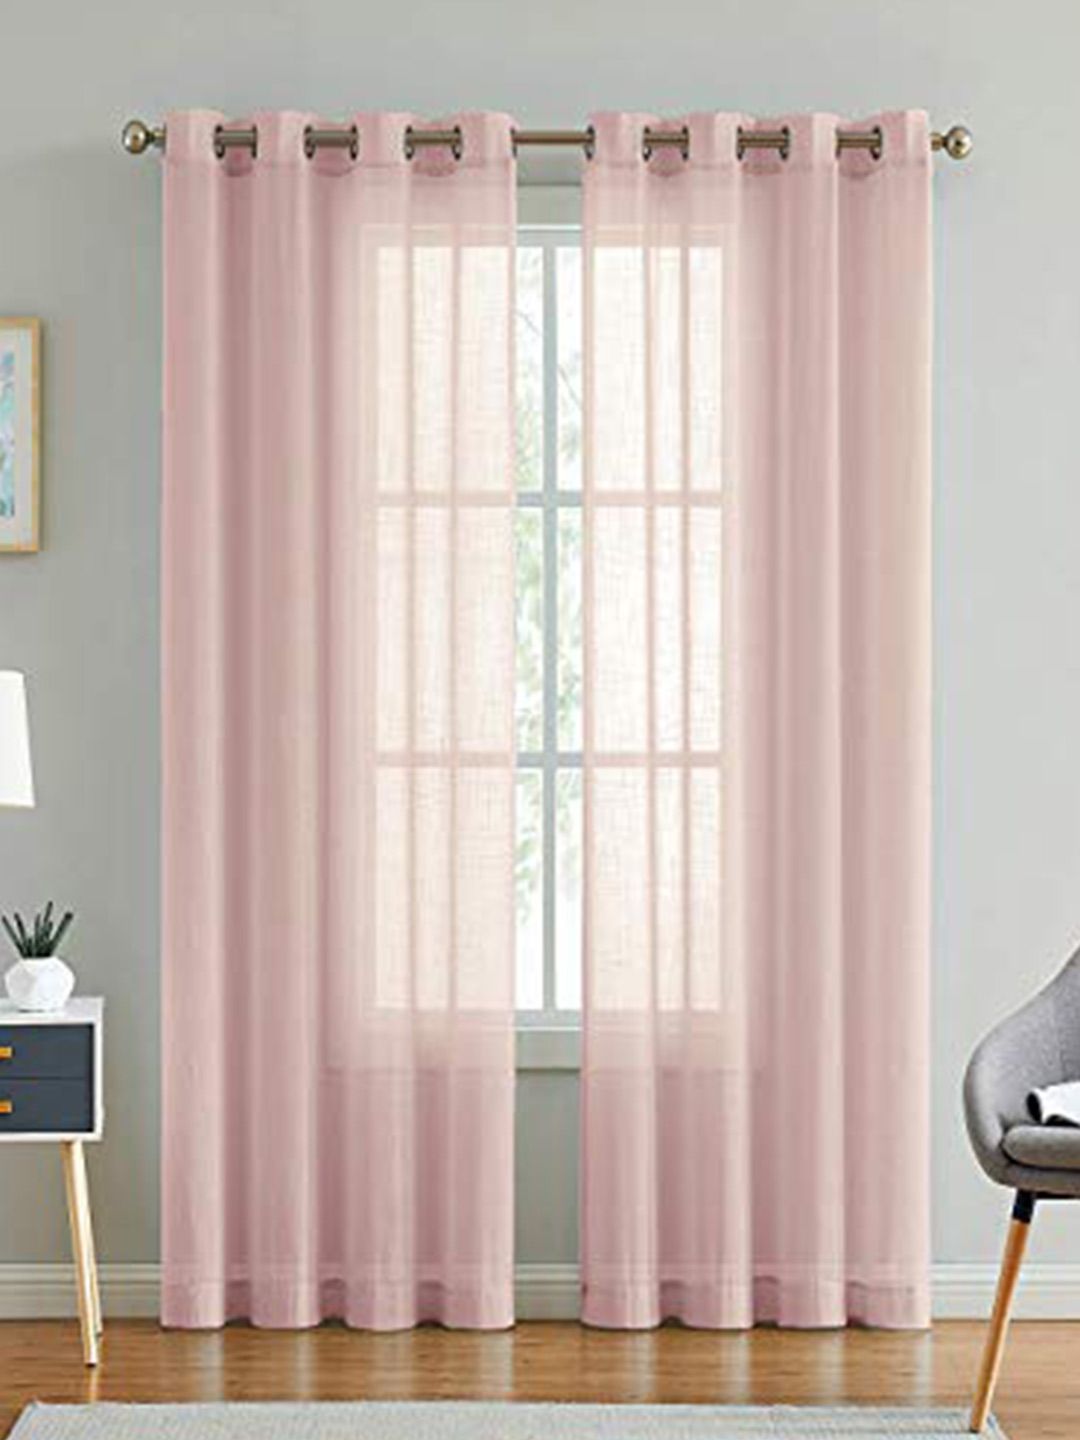 LINENWALAS Happy Sleeping Pink Set of 2 Striped Sheer Window Curtain Price in India